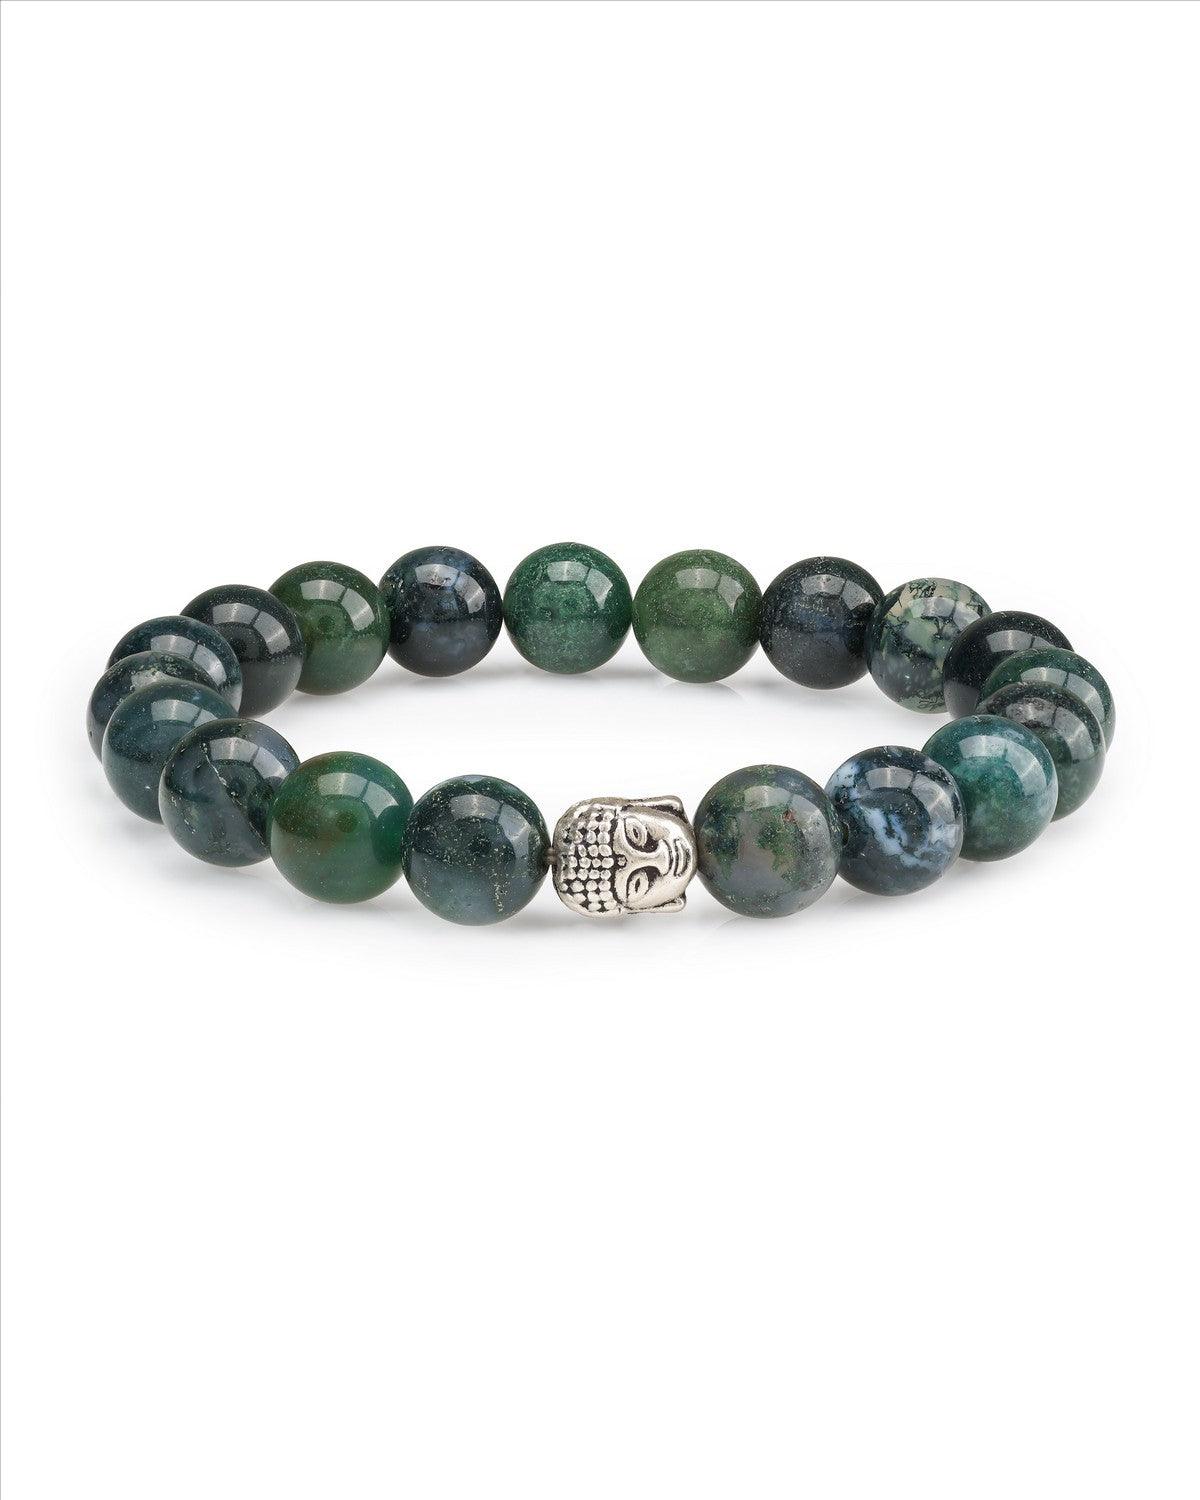 Moss Agate Beads 925 Sterling Silver Stretchable Bracelet 7" For Men's Jewelry - YoTreasure